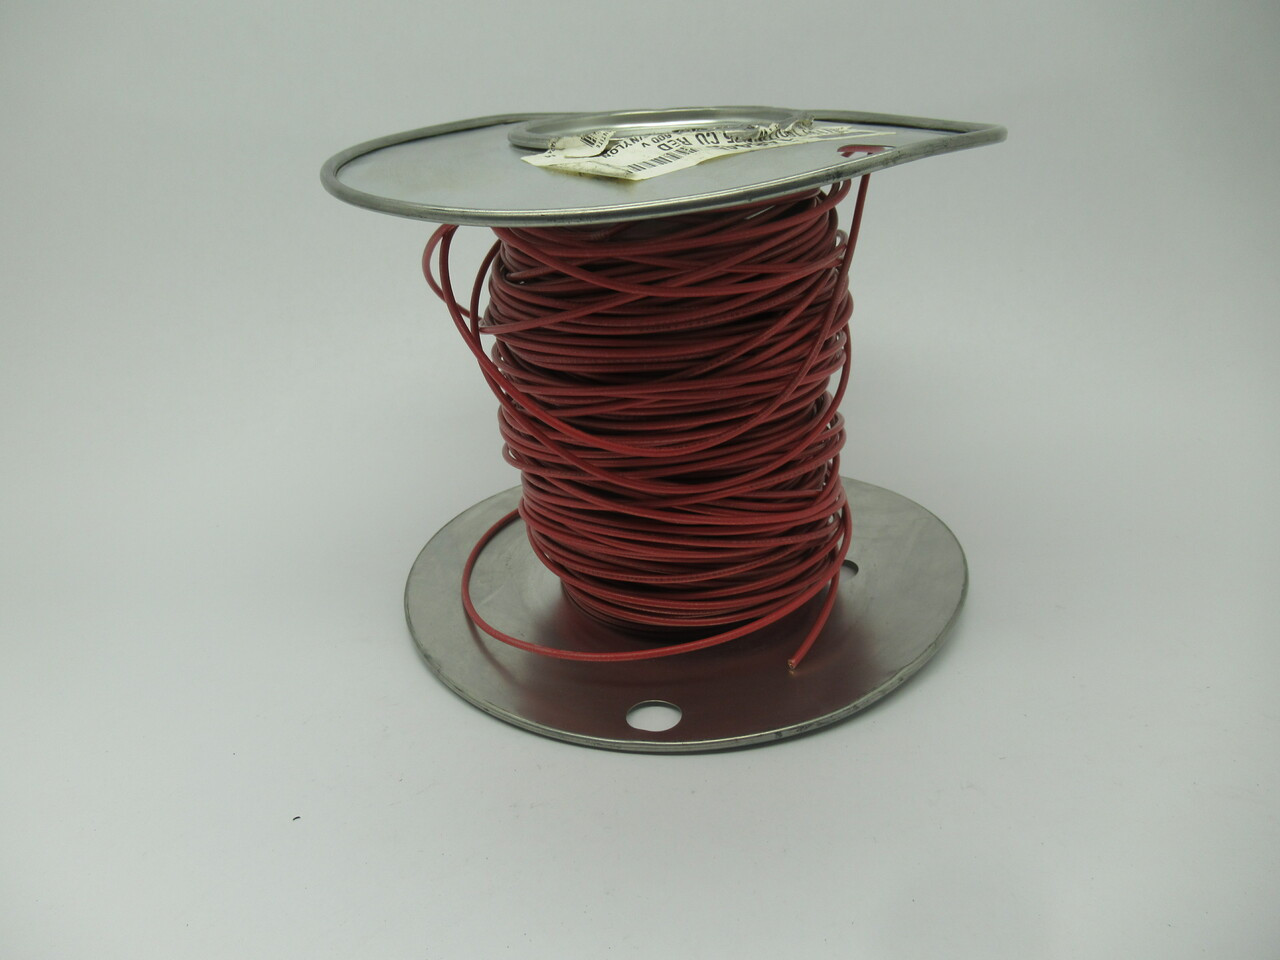 Nexans 148445 Red Wire 14 AWG 600V AC 60 Meters USED